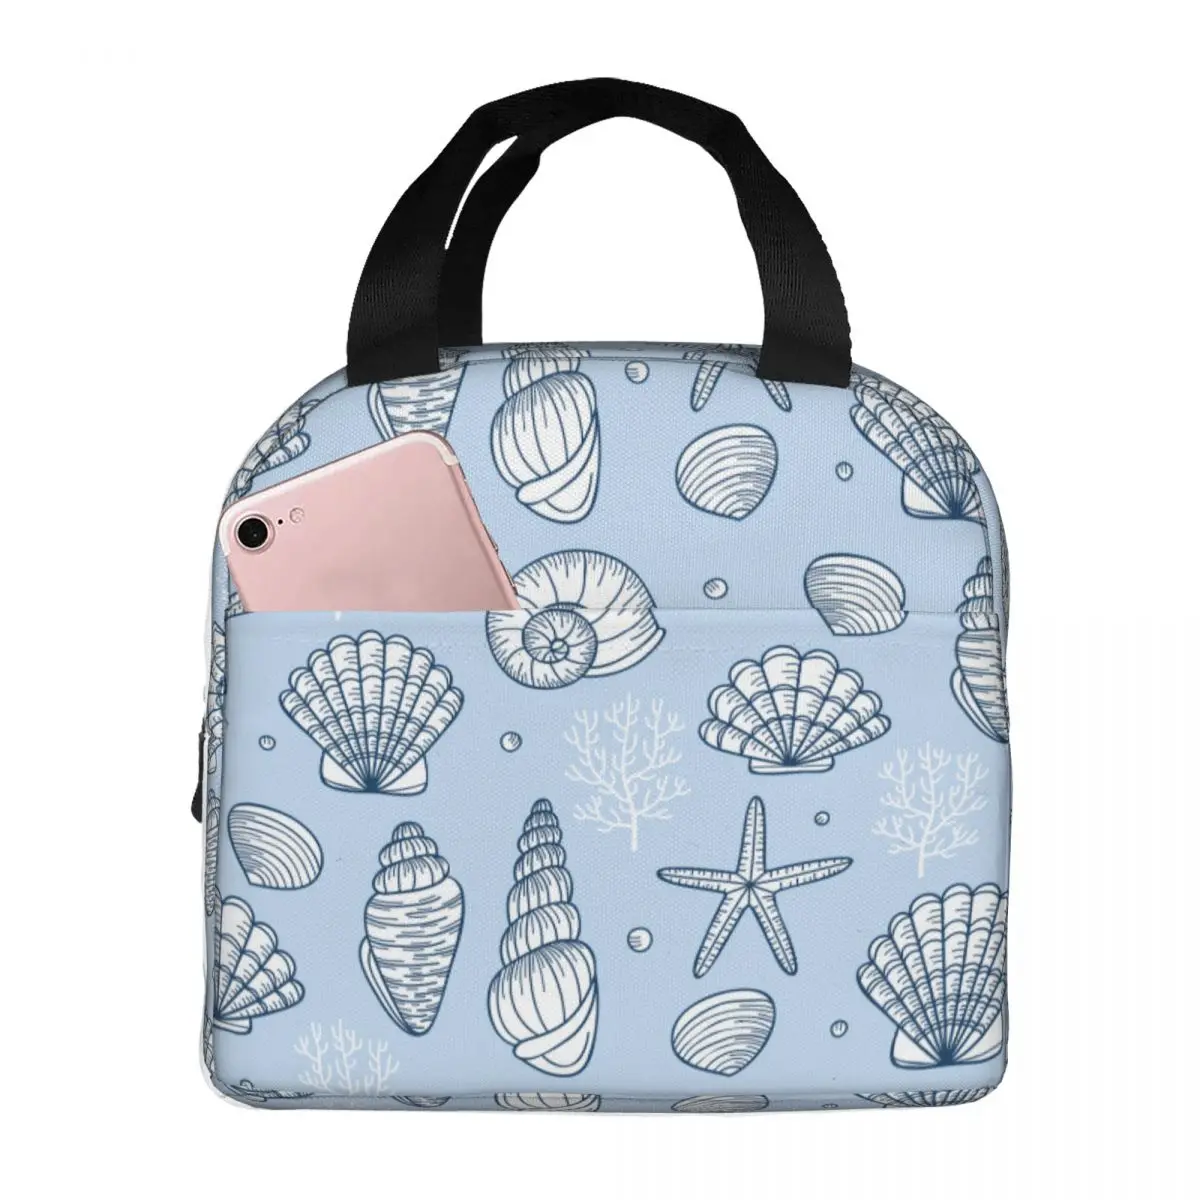 

Thermal Lunch Box Bag for Kids Coral Nautical Theme Food Storage Container Travel Picnic Bento Bag